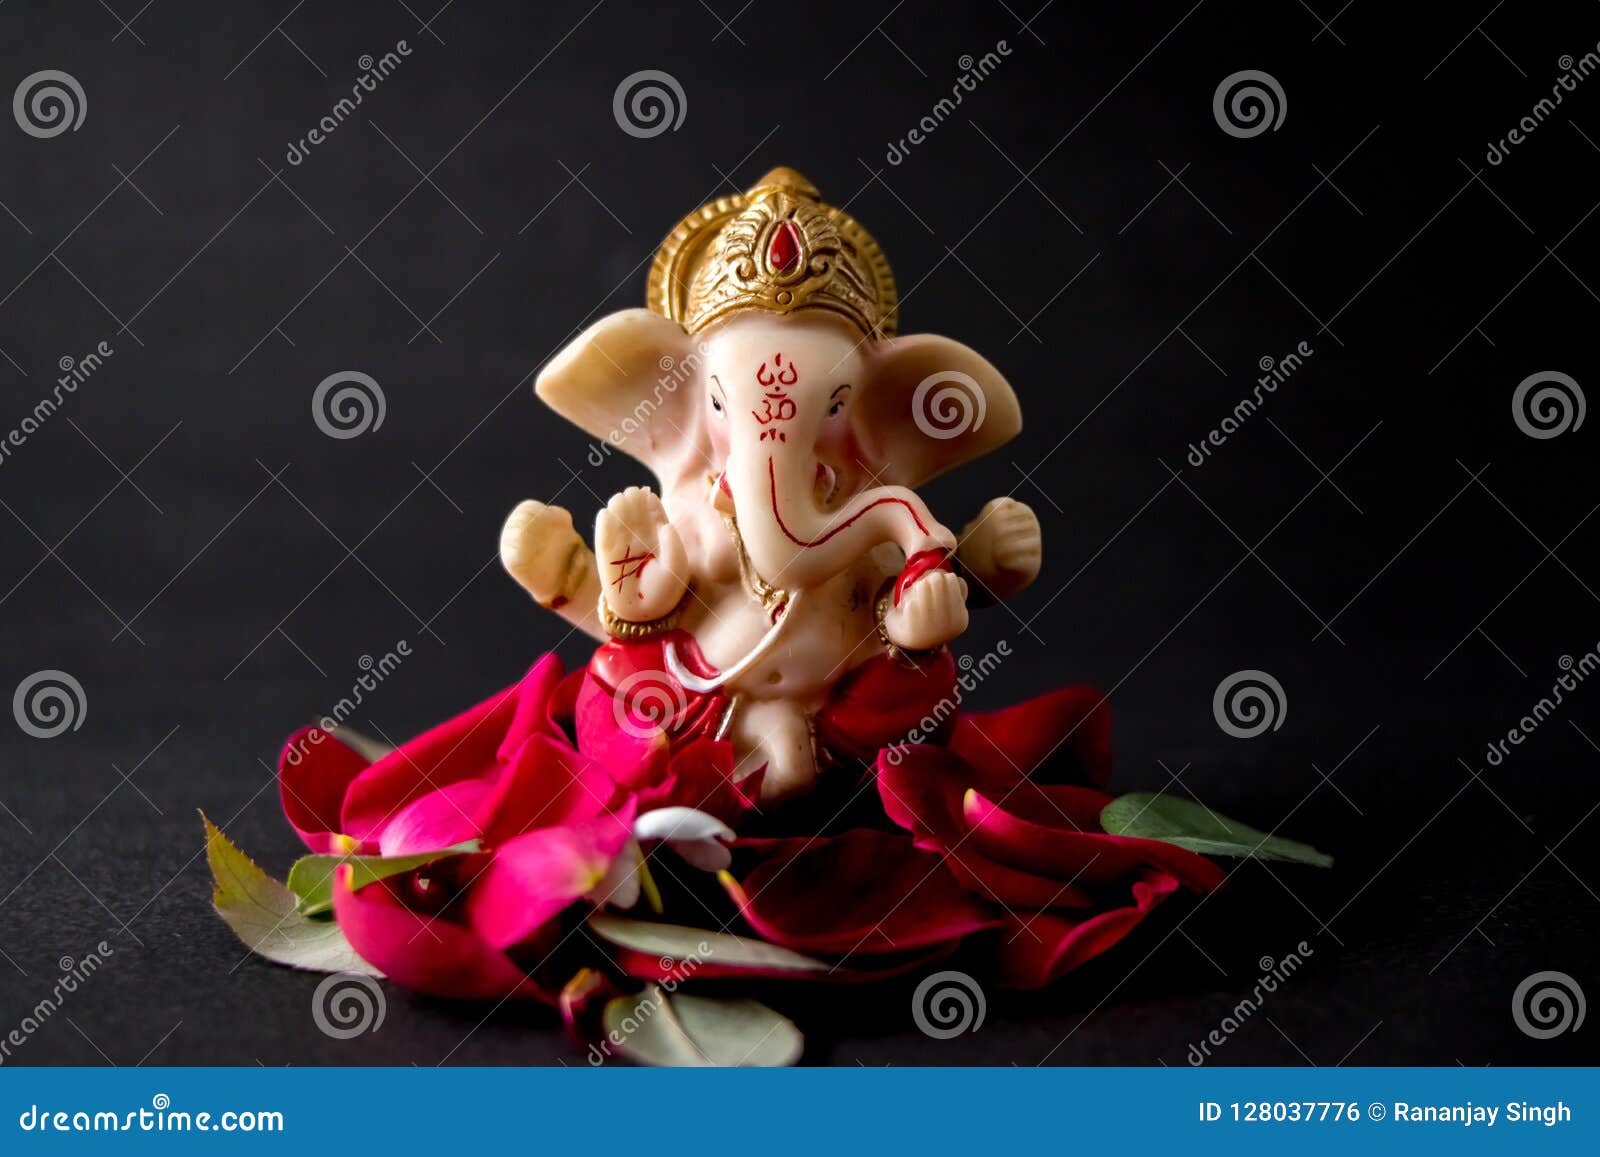 Lord Ganesha Idol with Rose Petals, White Flowers and Leaves on ...